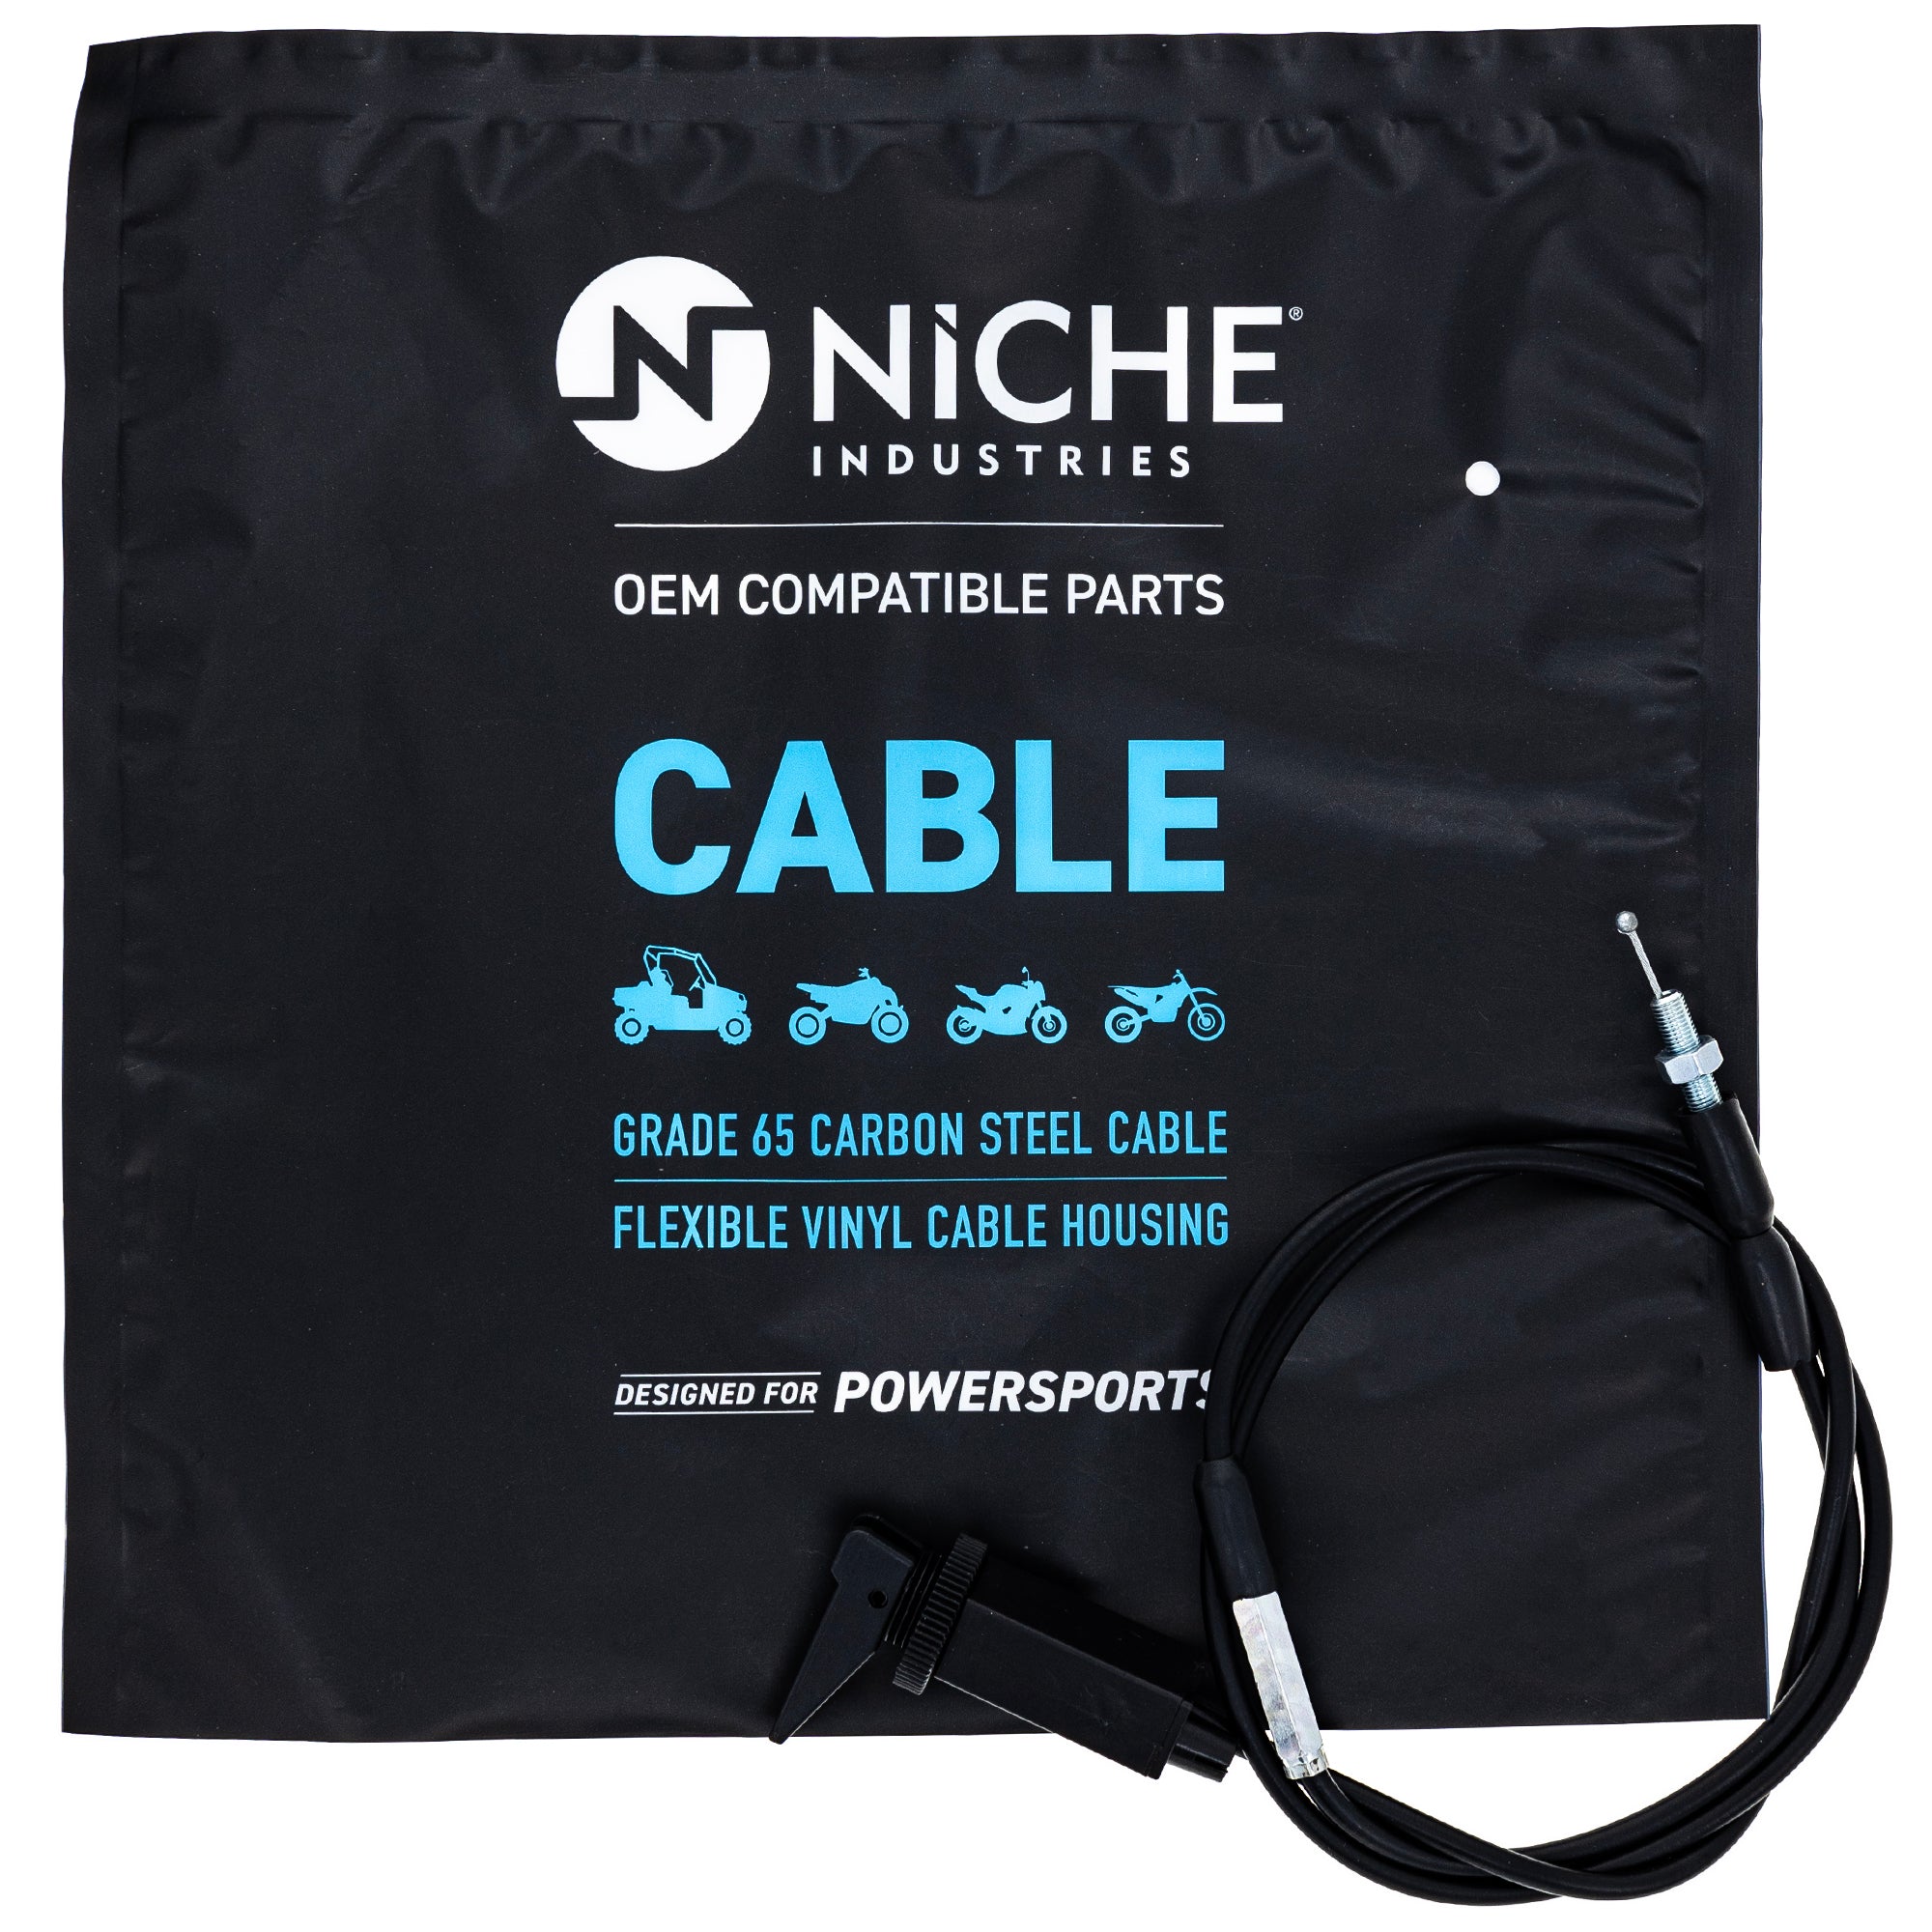 NICHE 519-CCB2229L Choke Cable for zOTHER Polaris Xpress Xpedition